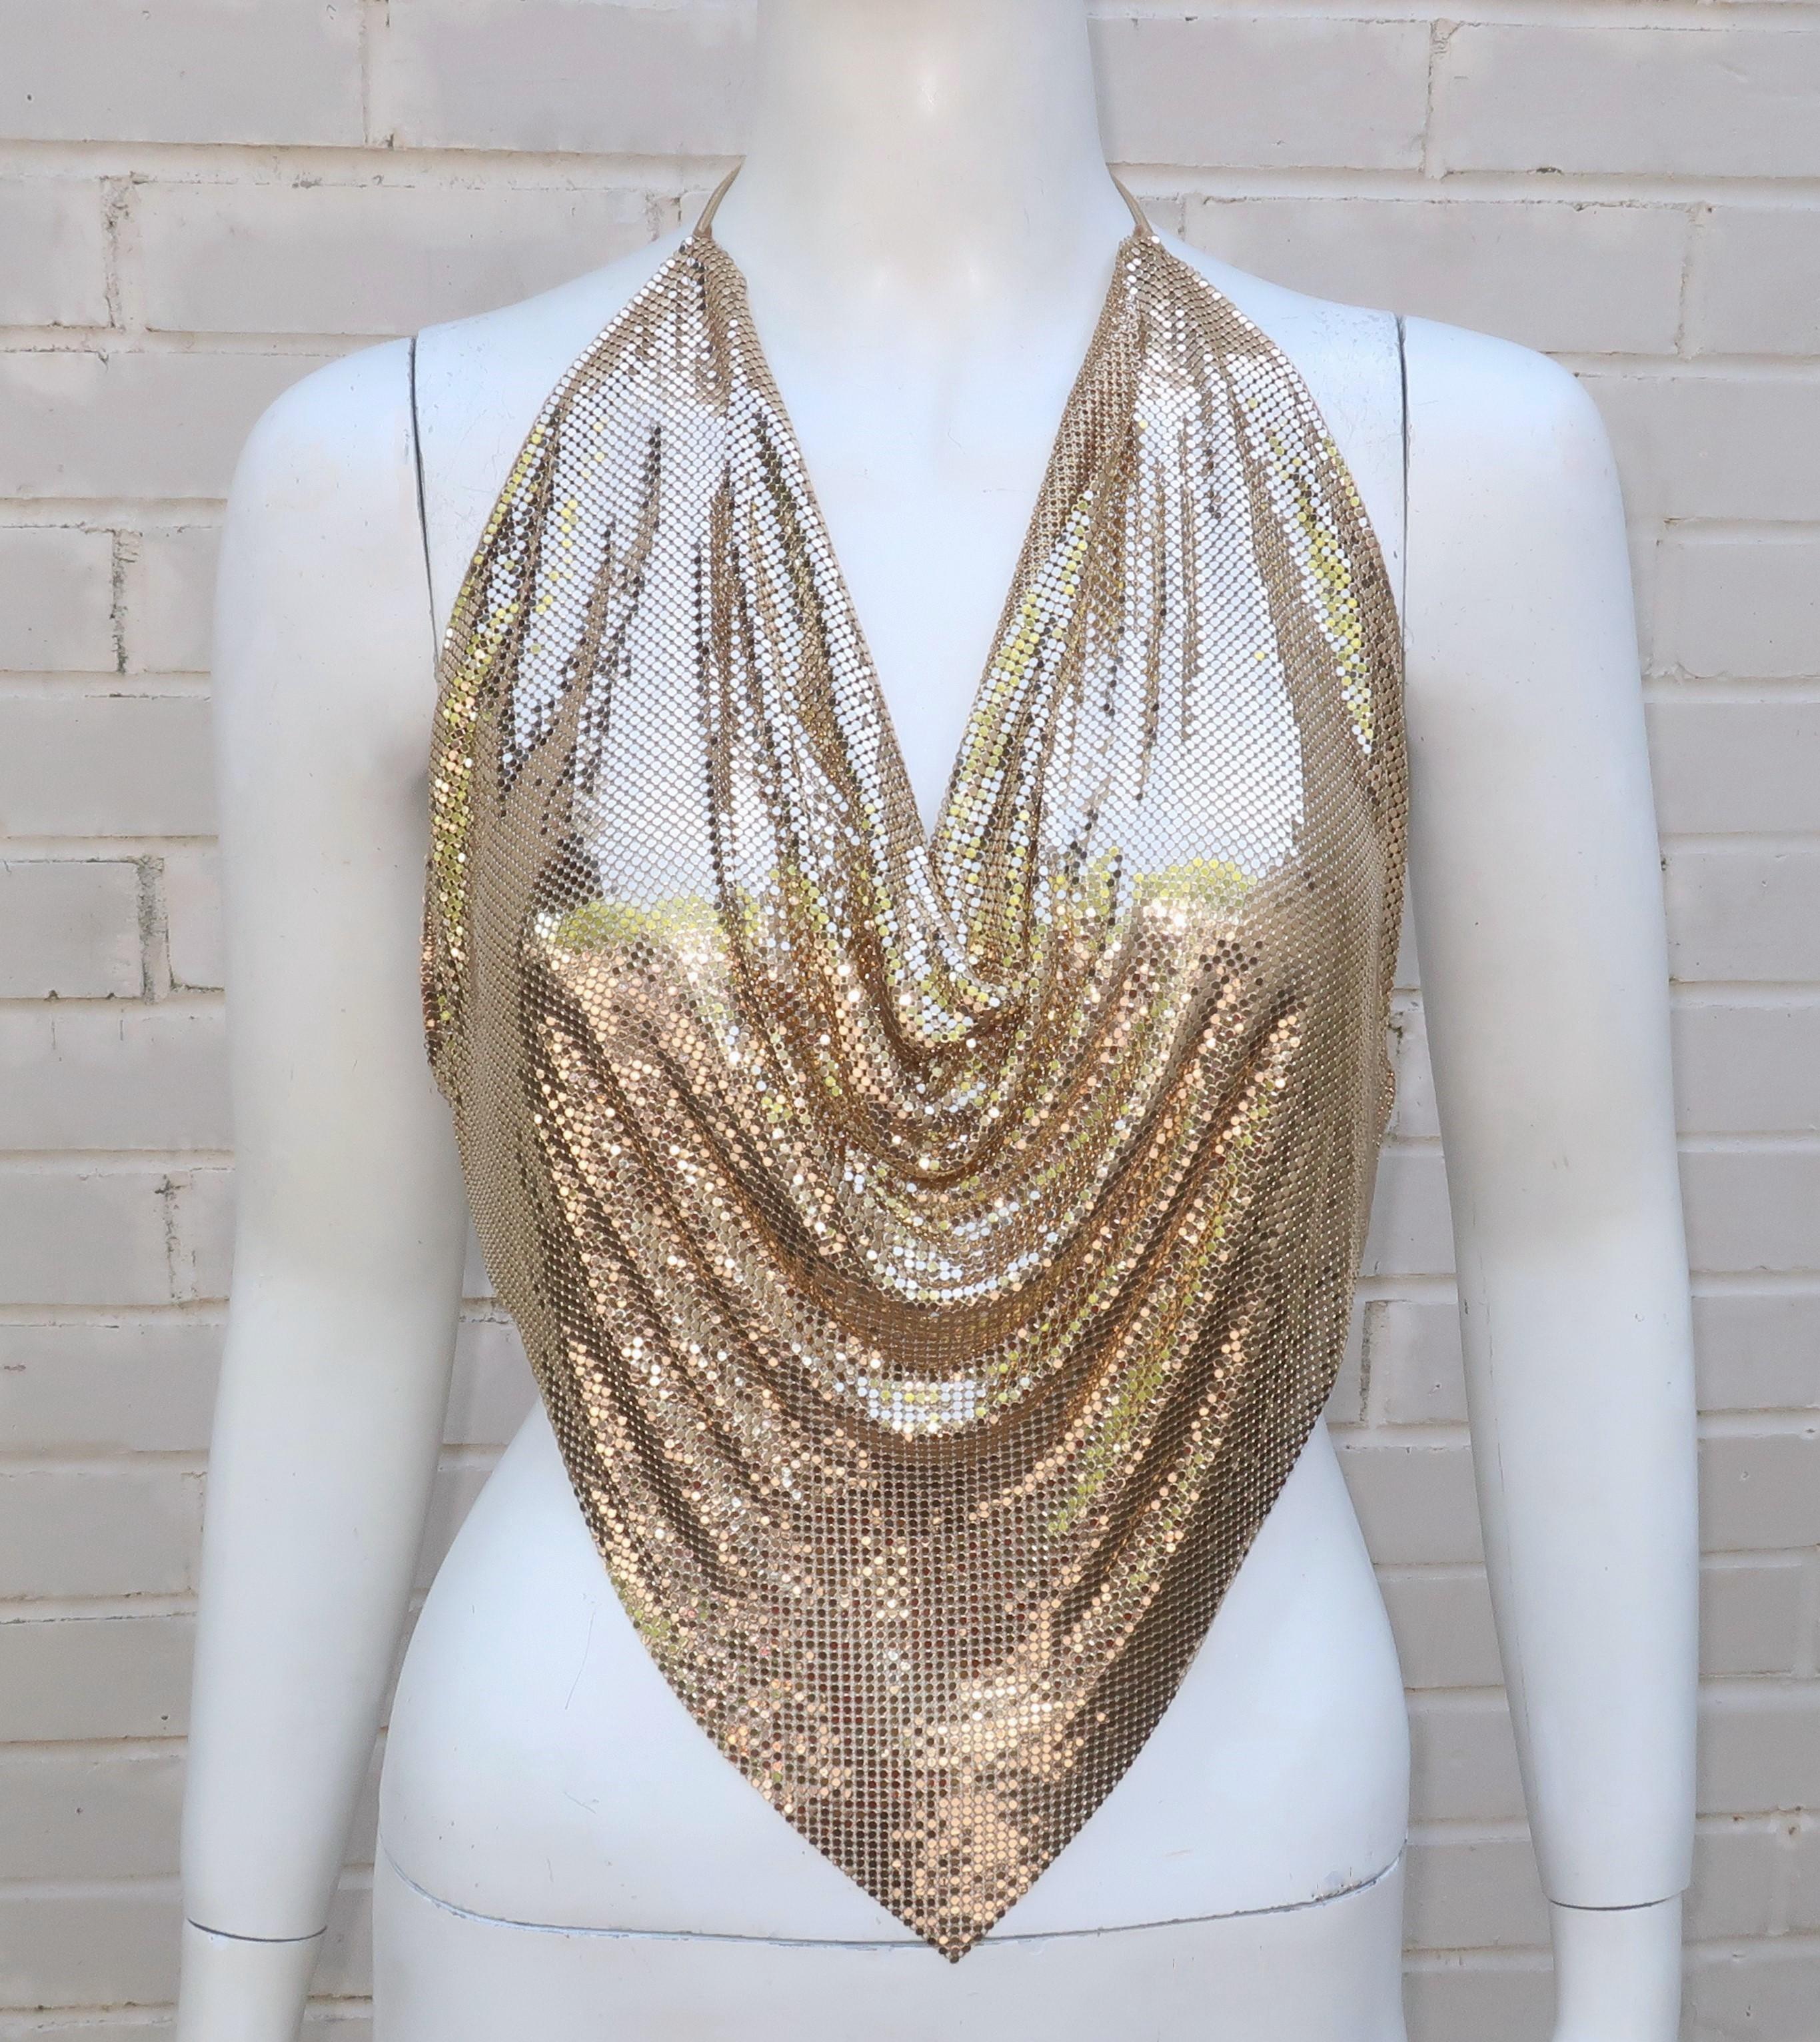 Get the midas touch with a vintage Whiting & Davis gold chain mail mesh halter top with gold leather ties.   The mesh 'fabric' is Whiting & Davis' signature material which hearkens back to the early 1900's.  The top has felt lined edges to keep it